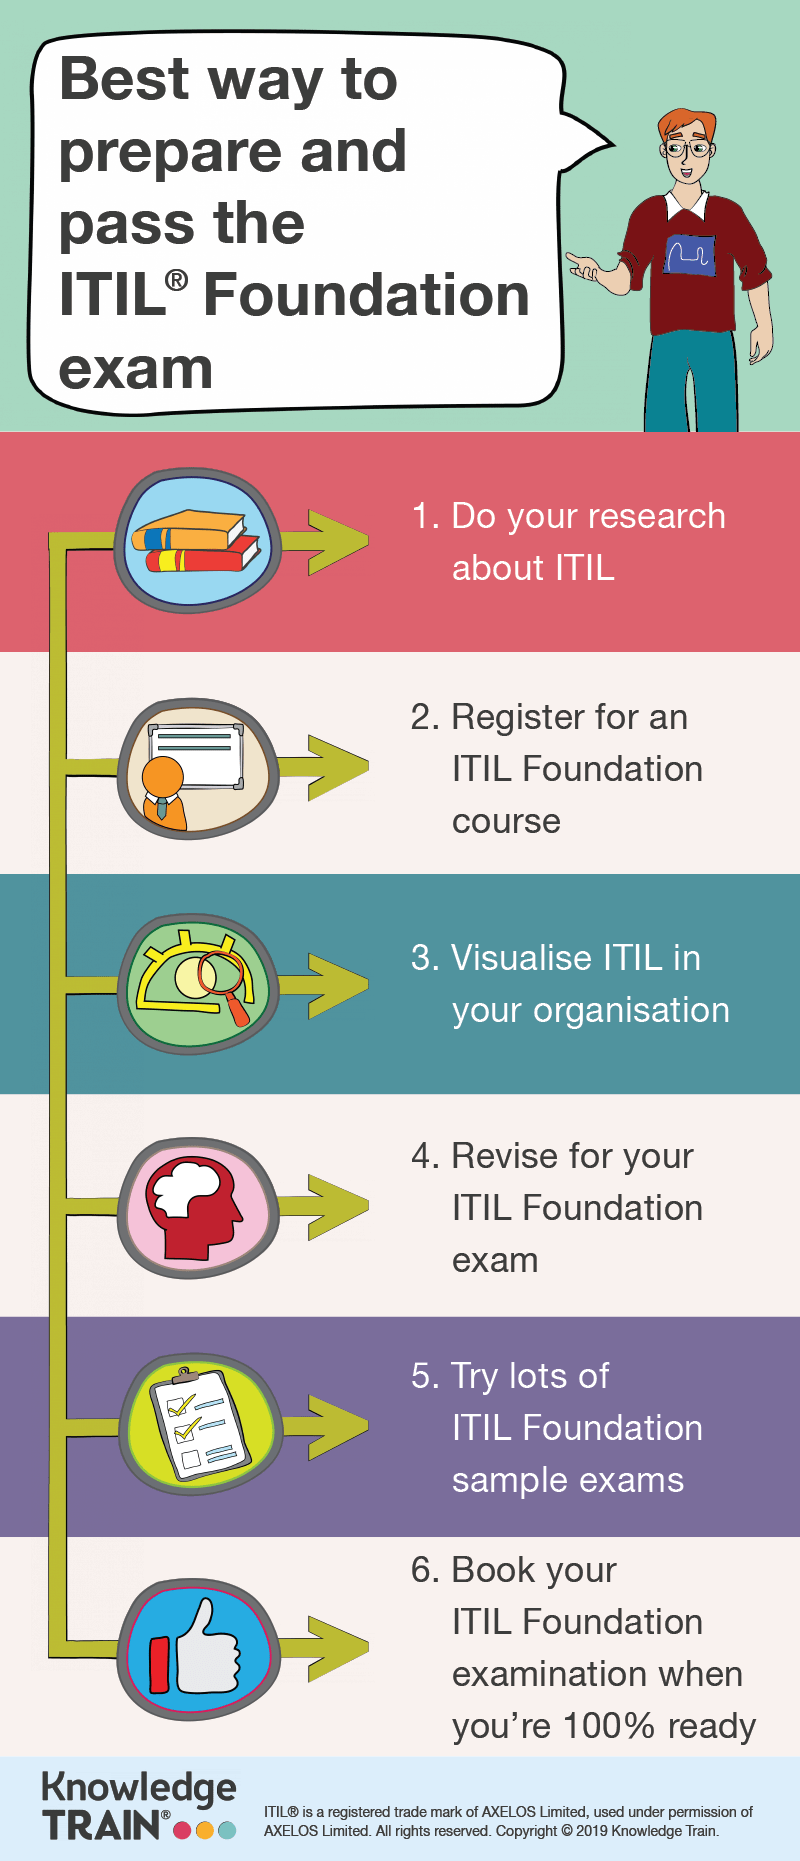 The best way to prepare and pass your ITIL Foundation exam